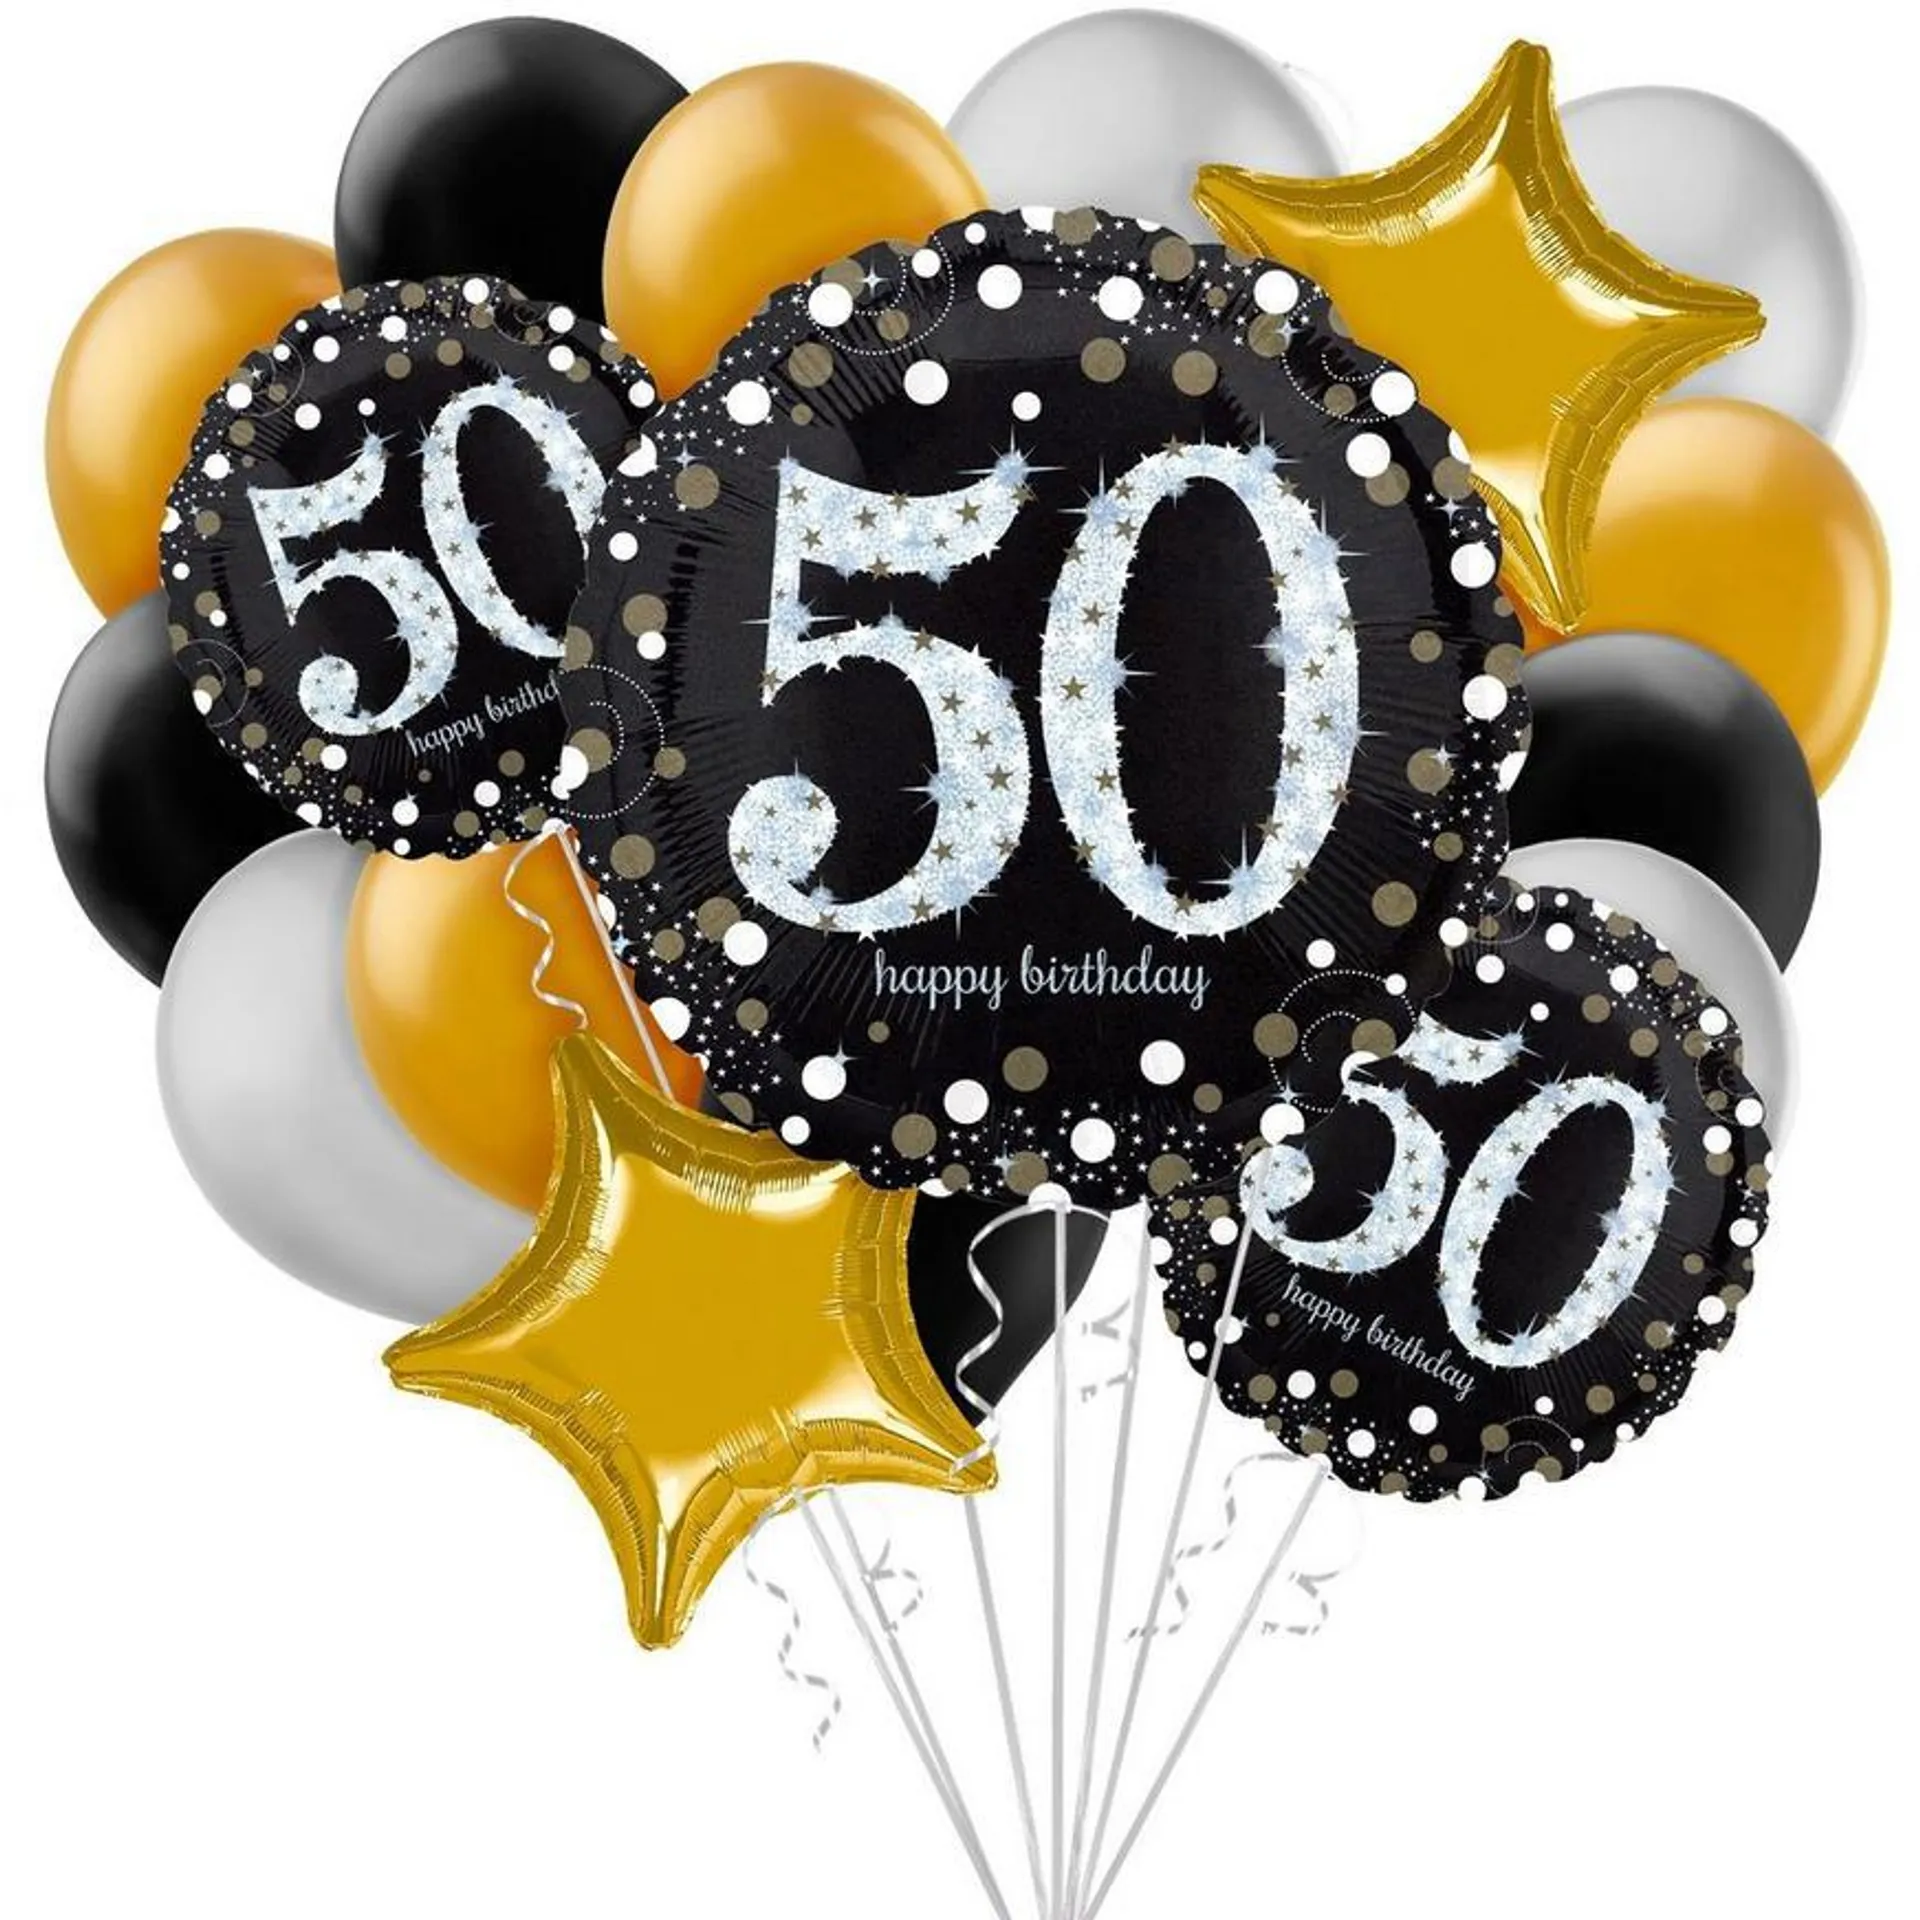 Deluxe 50th Birthday Foil & Latex Balloon Bouquet, 17pc - Sparkling Celebration